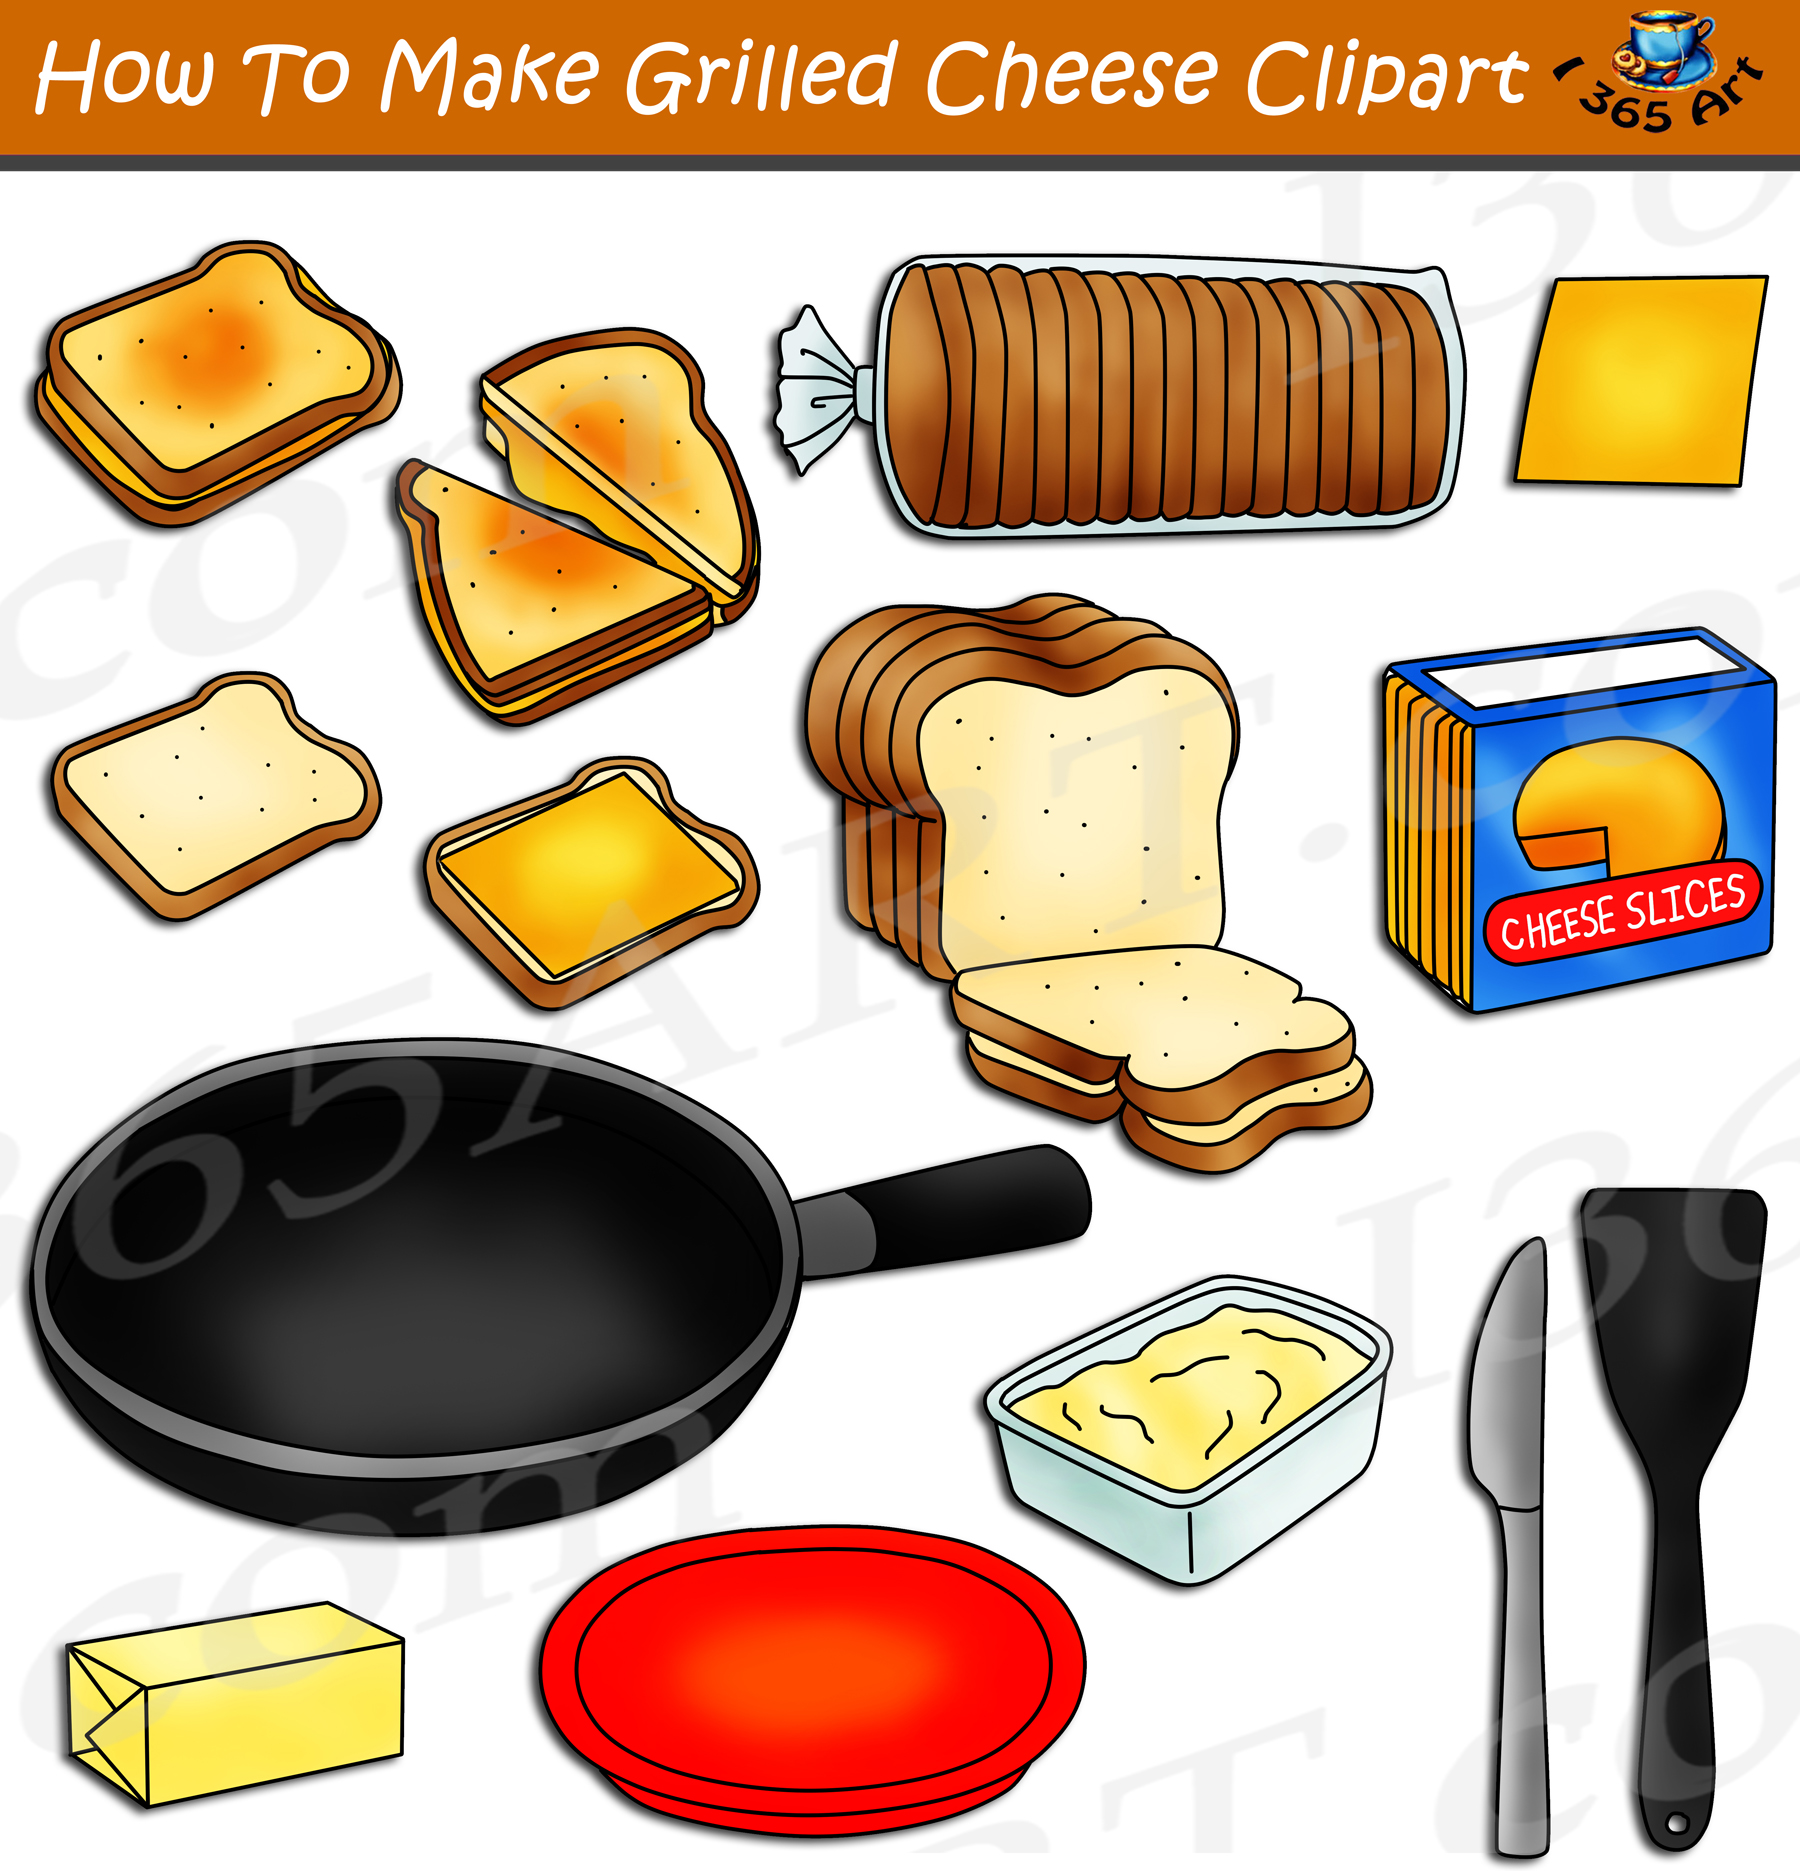 How To Make A Grilled Cheese Sandwich Clipart Download - Clipart 4 School.